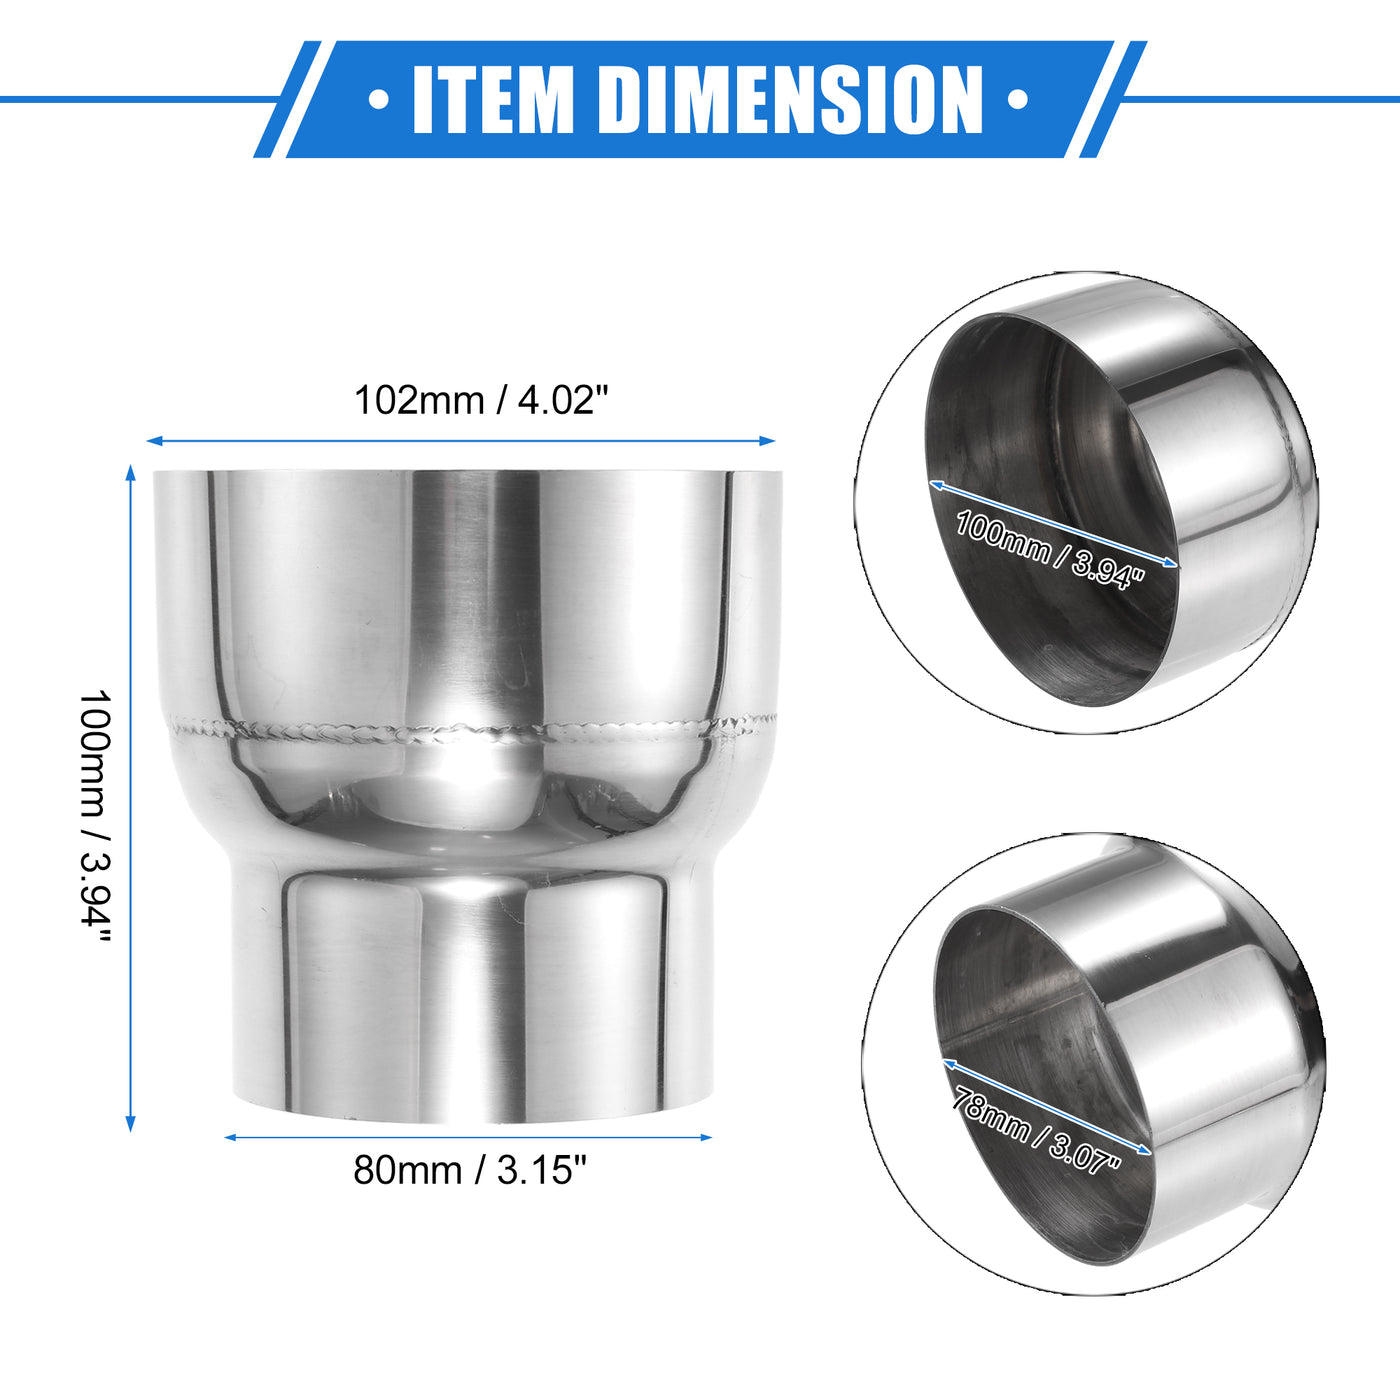 VekAuto Exhaust Pipe Adapter Connector Reducer, 3" ID - 4" OD Exhaust Adapter Universal for Car Truck Pickup Durable Stainless Steel Silver Tone